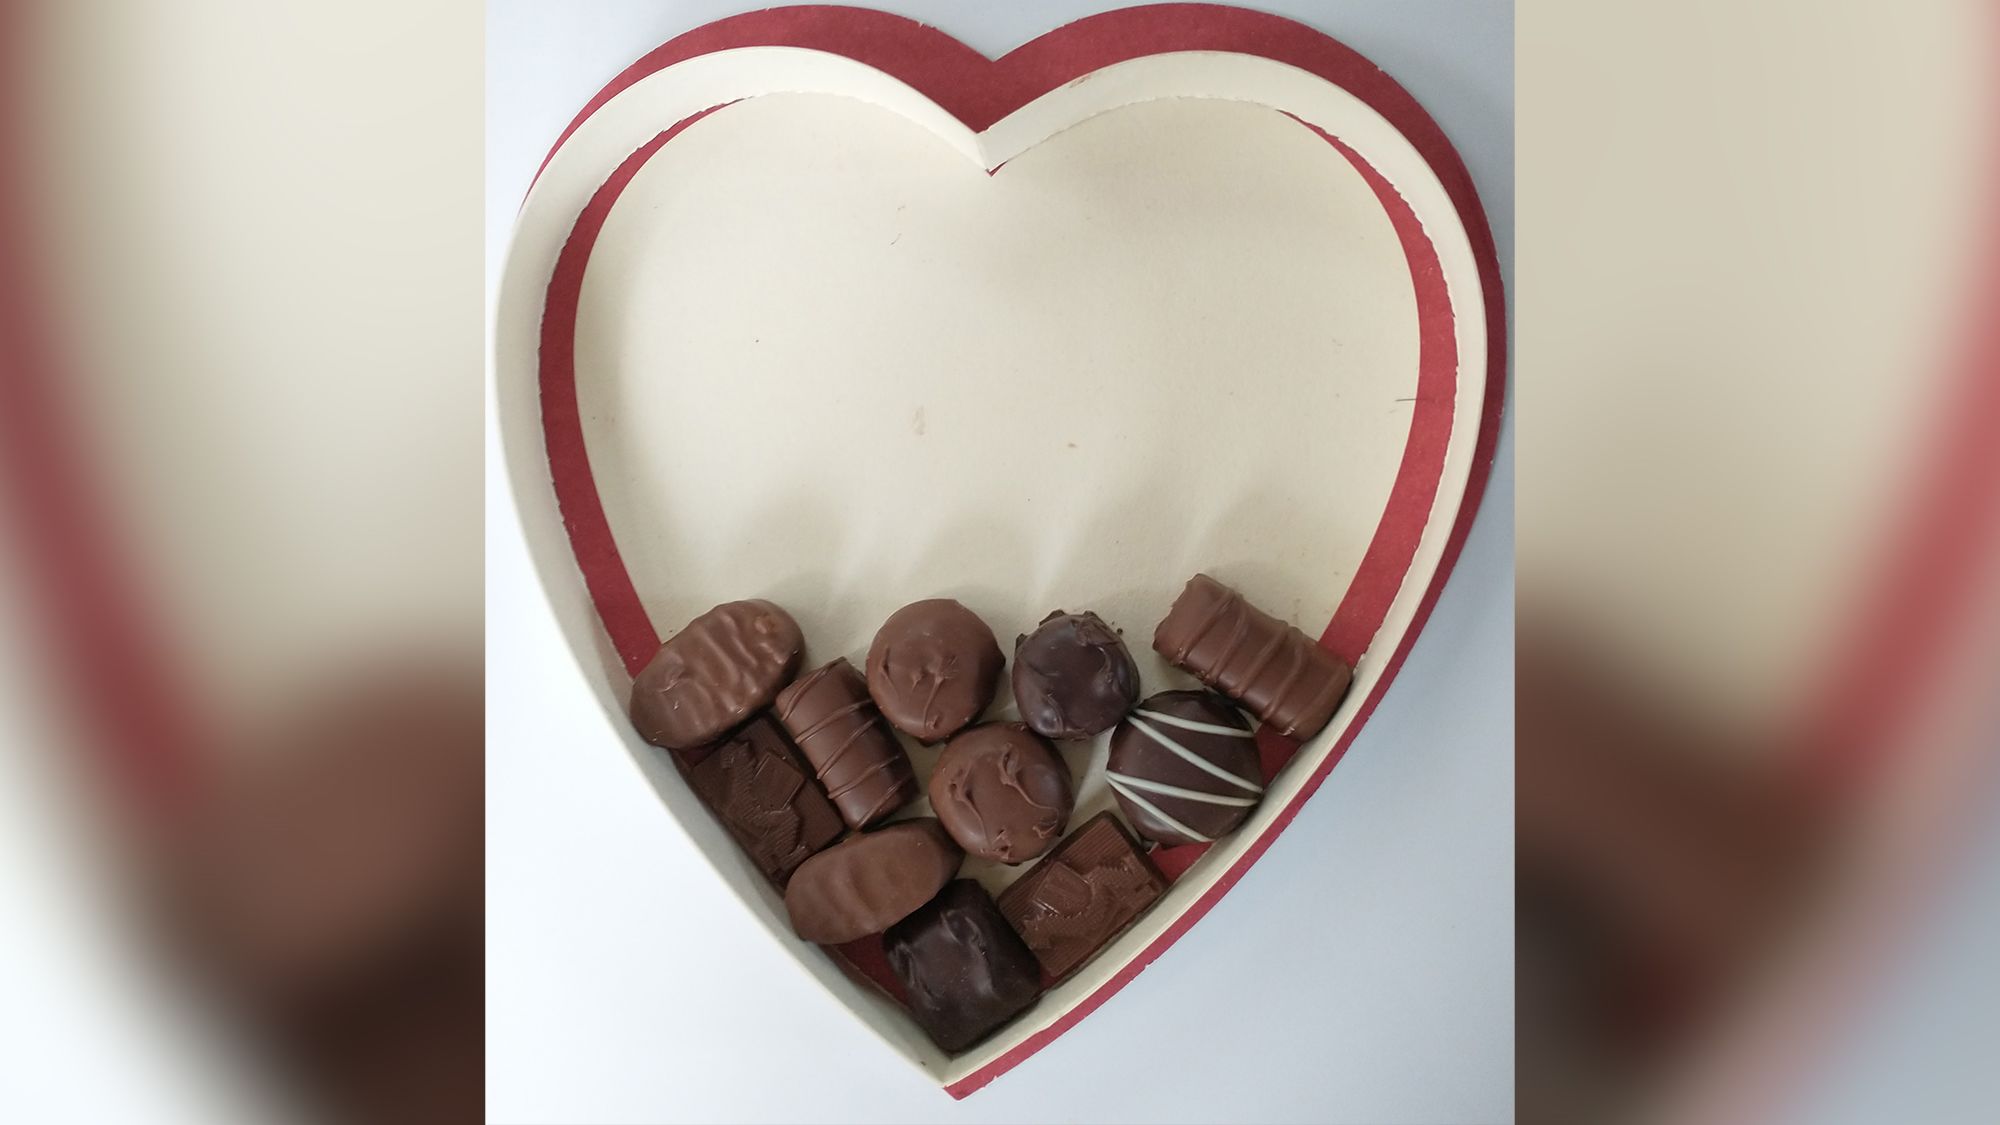 Feeling ripped off on Valentine's Day? Popular chocolate boxes